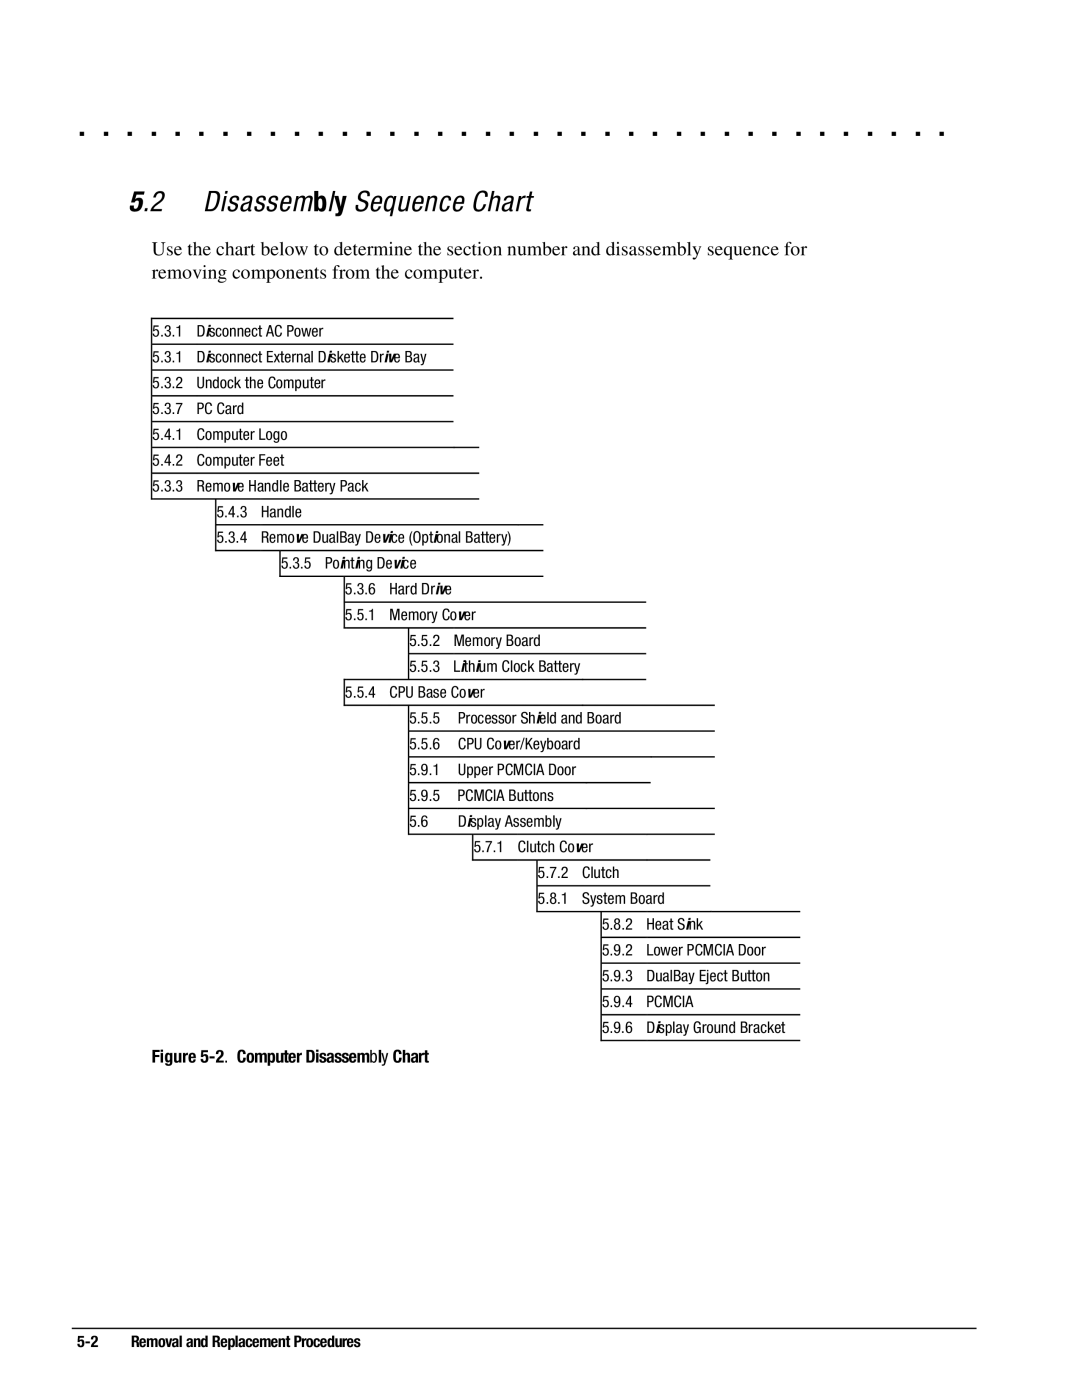 Compaq 4130T, 4150T, 4140T, 4131T, 4200, 4125T, 4160T, 4120, 4125D Disassembly Sequence Chart, 2. Computer Disassembly Chart 